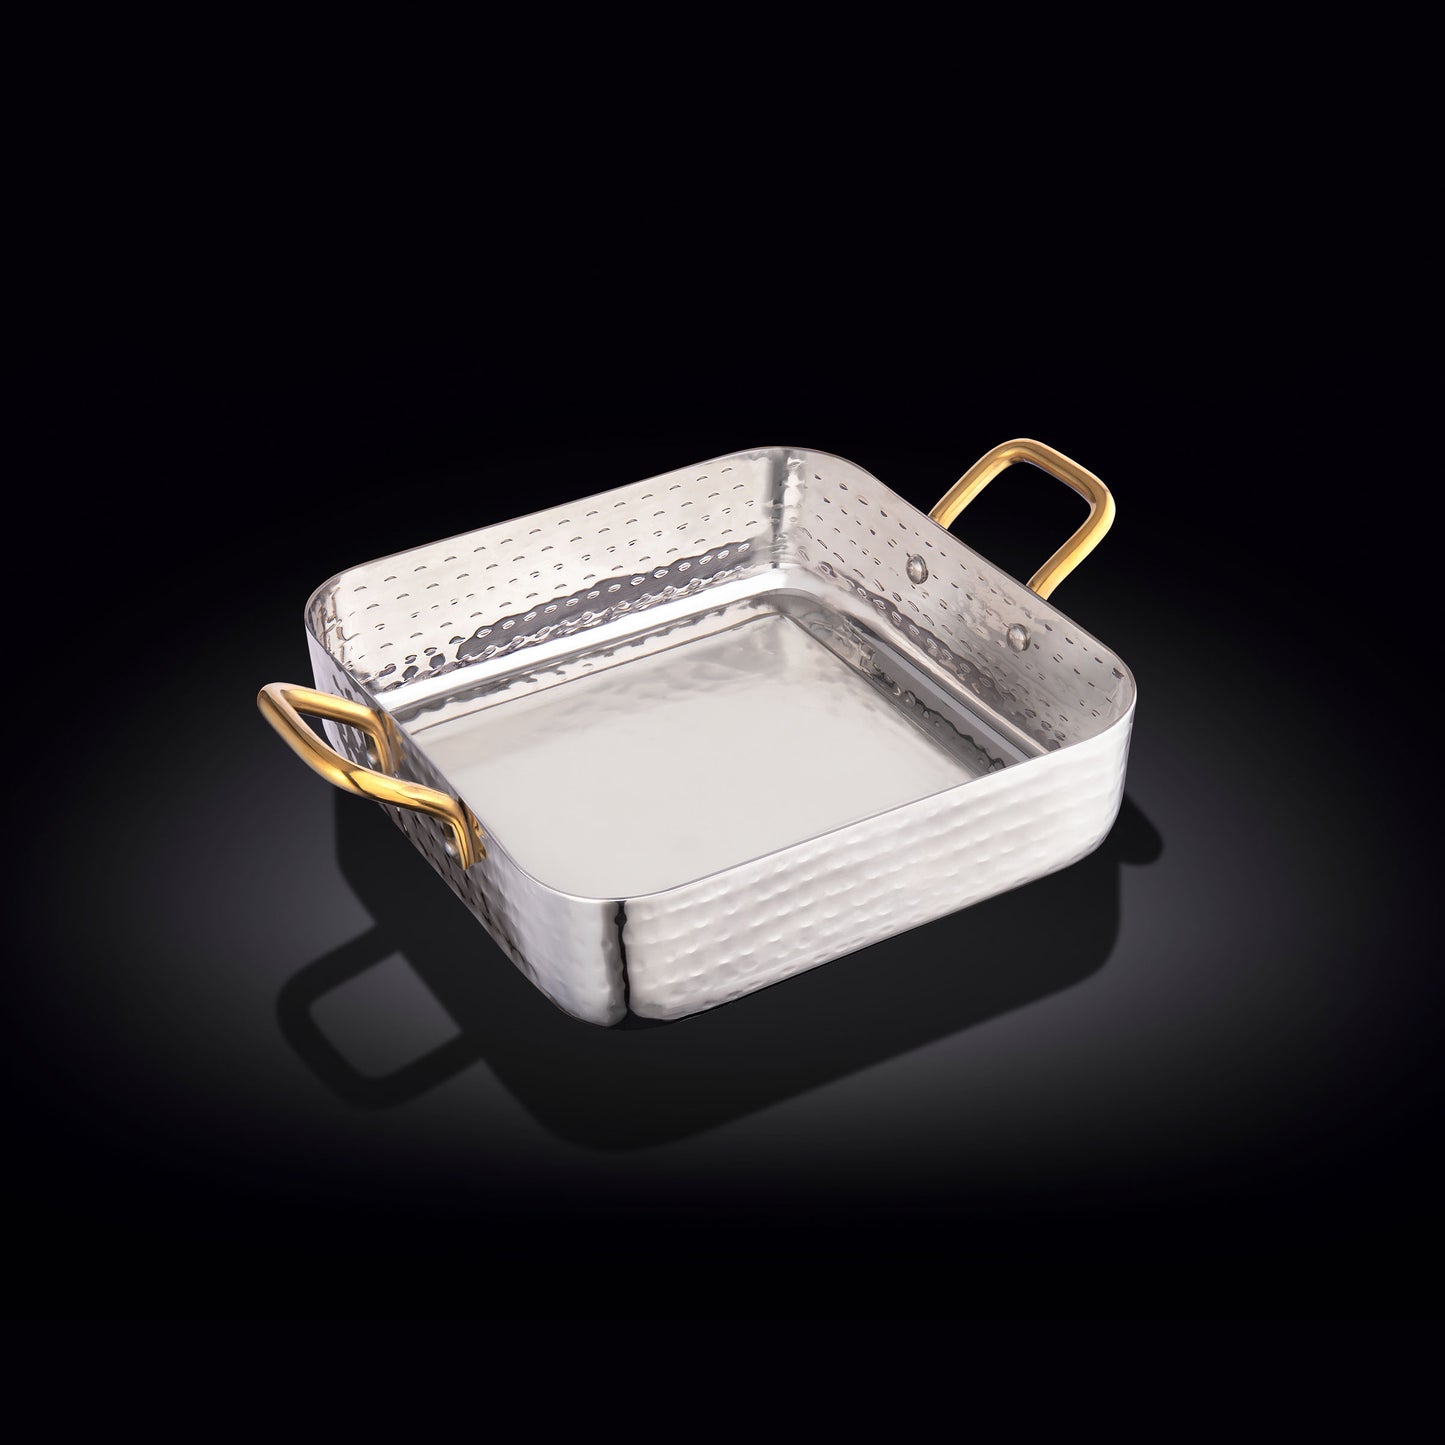 SQUARE FRY PAN WITH 2 SIDE GOLD HANDLES 6.25" X 6.25" X 1.75" | 16 X 16 X 4.2 CM